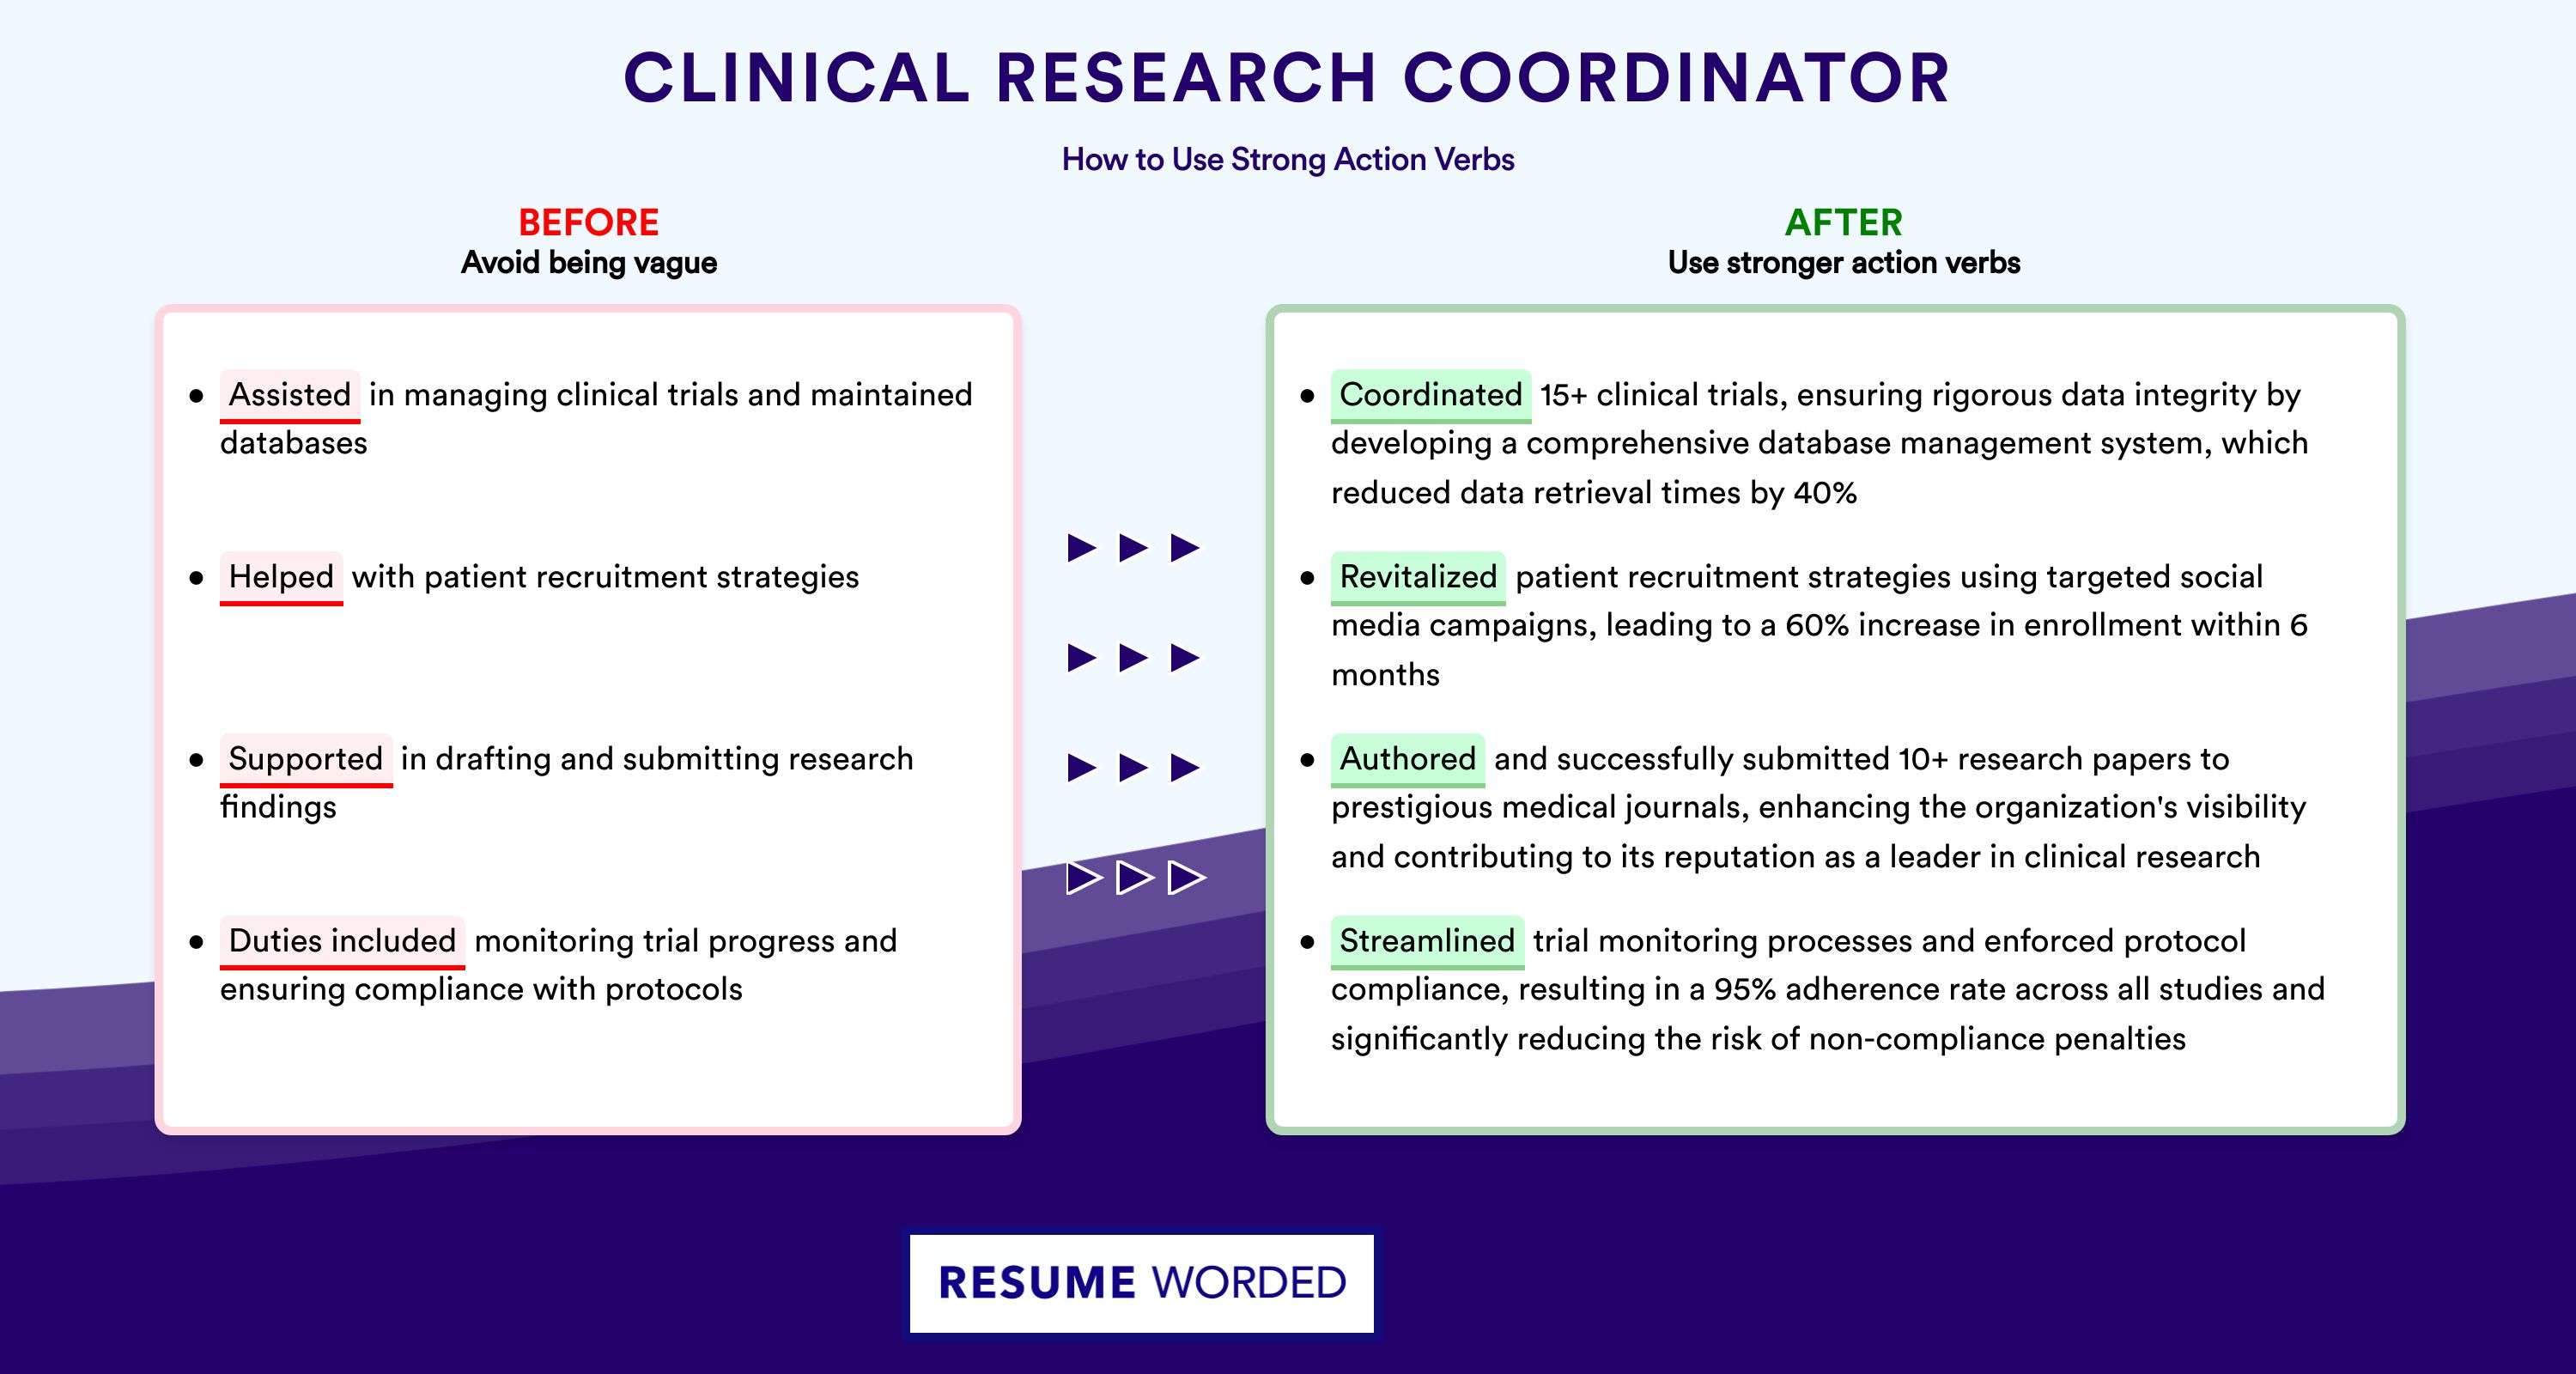 Action Verbs for Clinical Research Coordinator